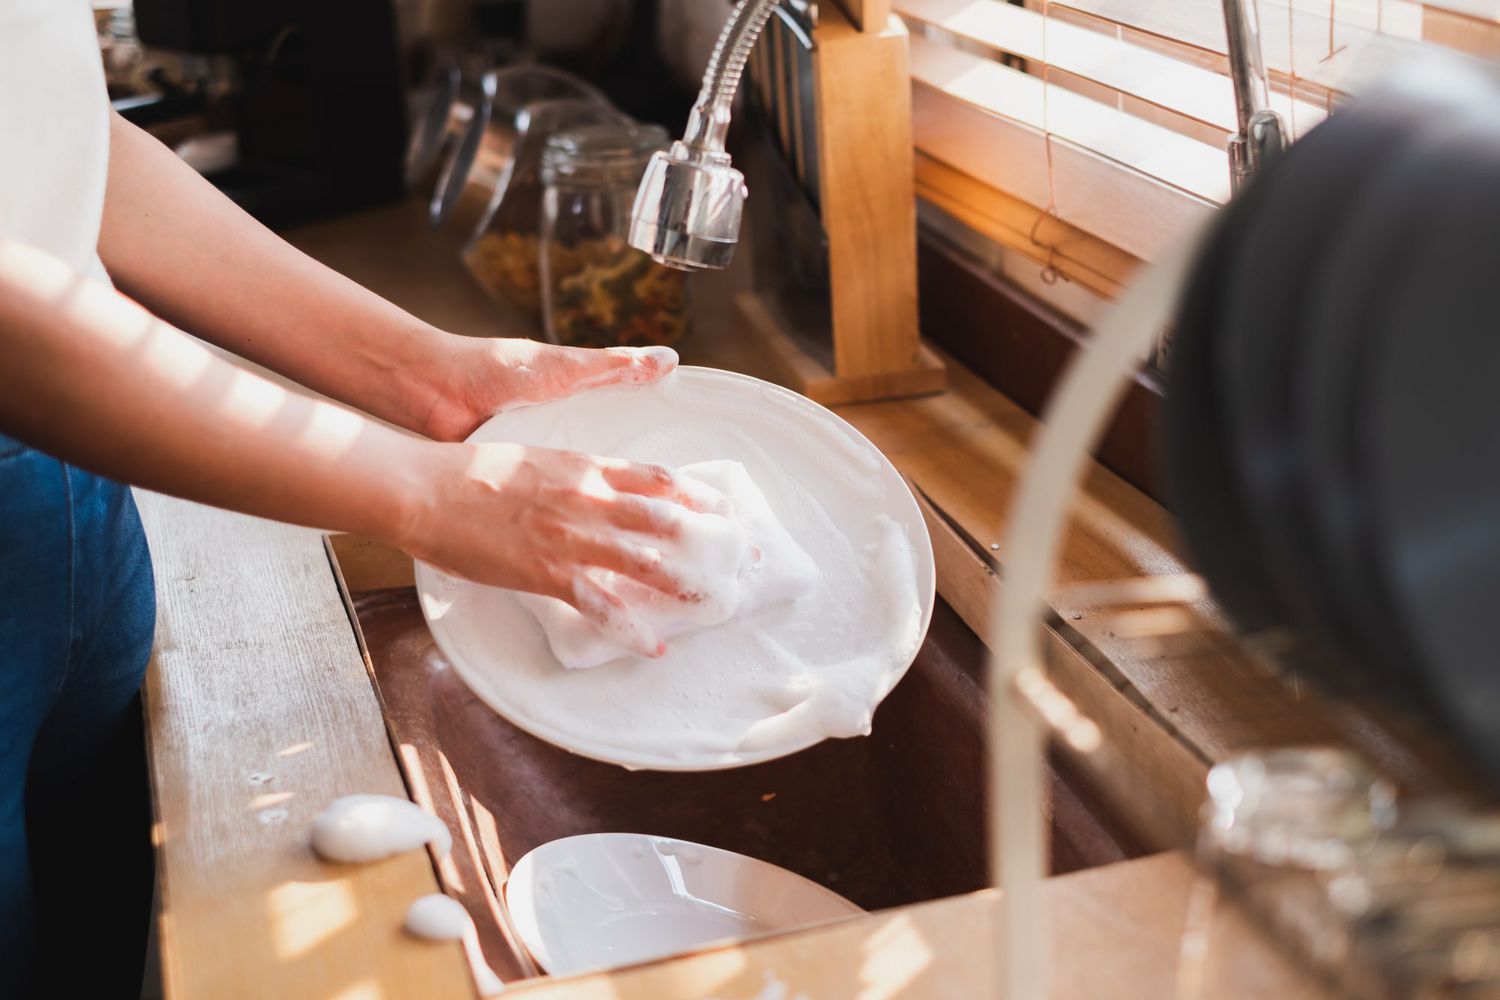 hand washing dishes with sponge